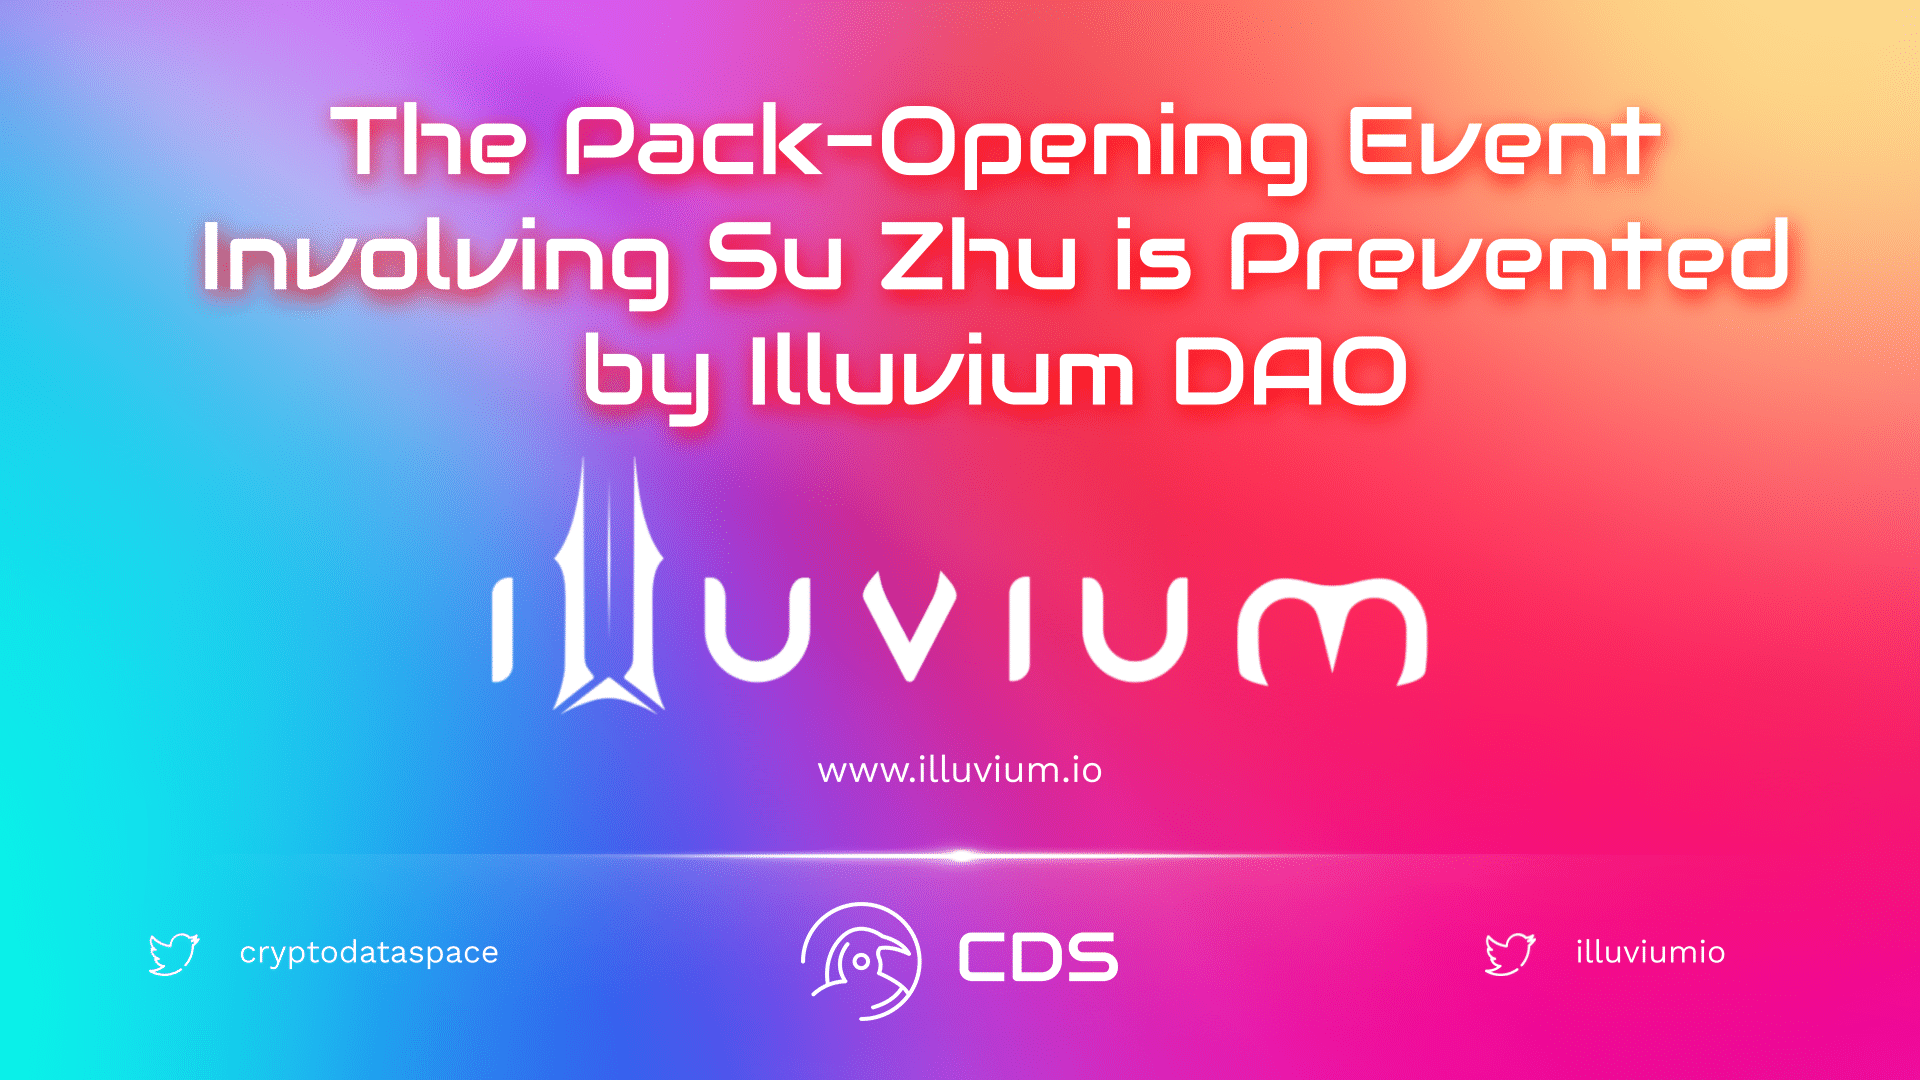 The Pack-Opening Event Involving Su Zhu is Prevented by Illuvium DAO